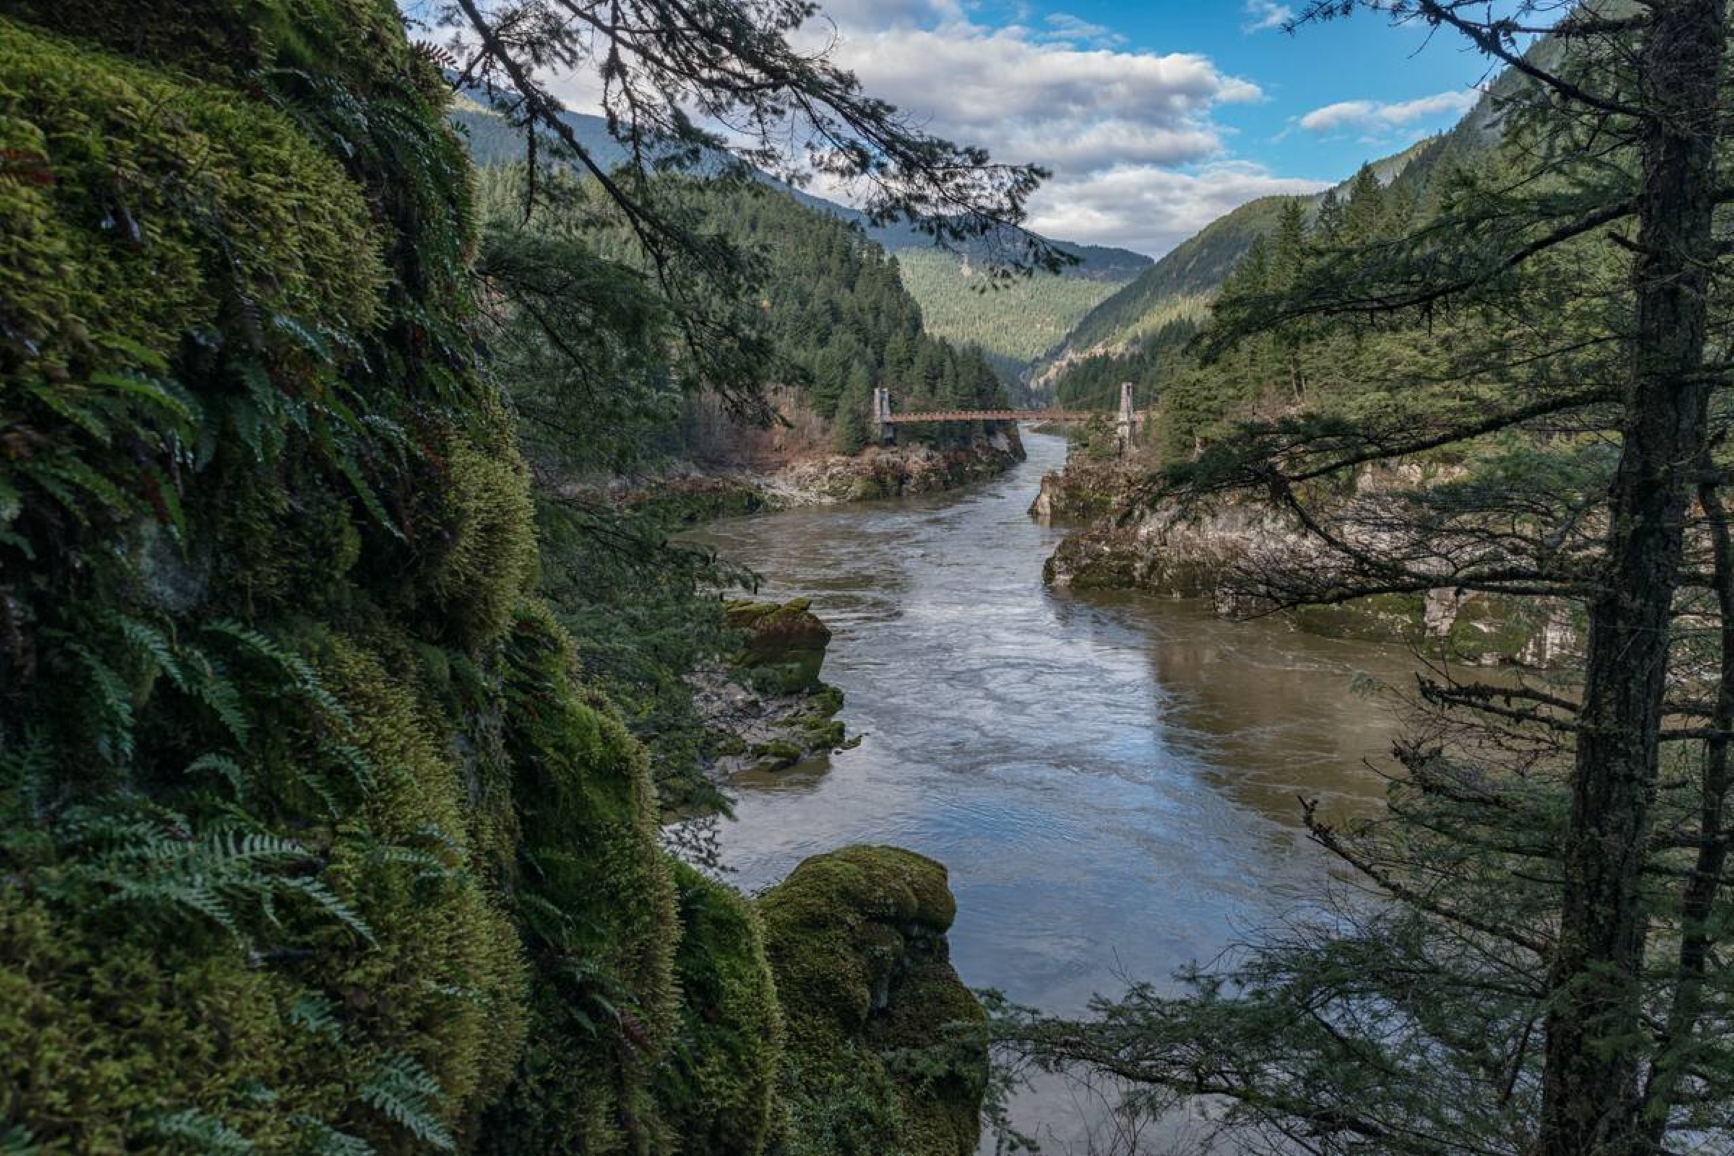 Alexandra bridge crossing the Fraser River. Mountains and lush forests provide a spectacular backdrop. Moss and ferns covering a rocky outcrop frame the view.  Photo credit: Destination BC.